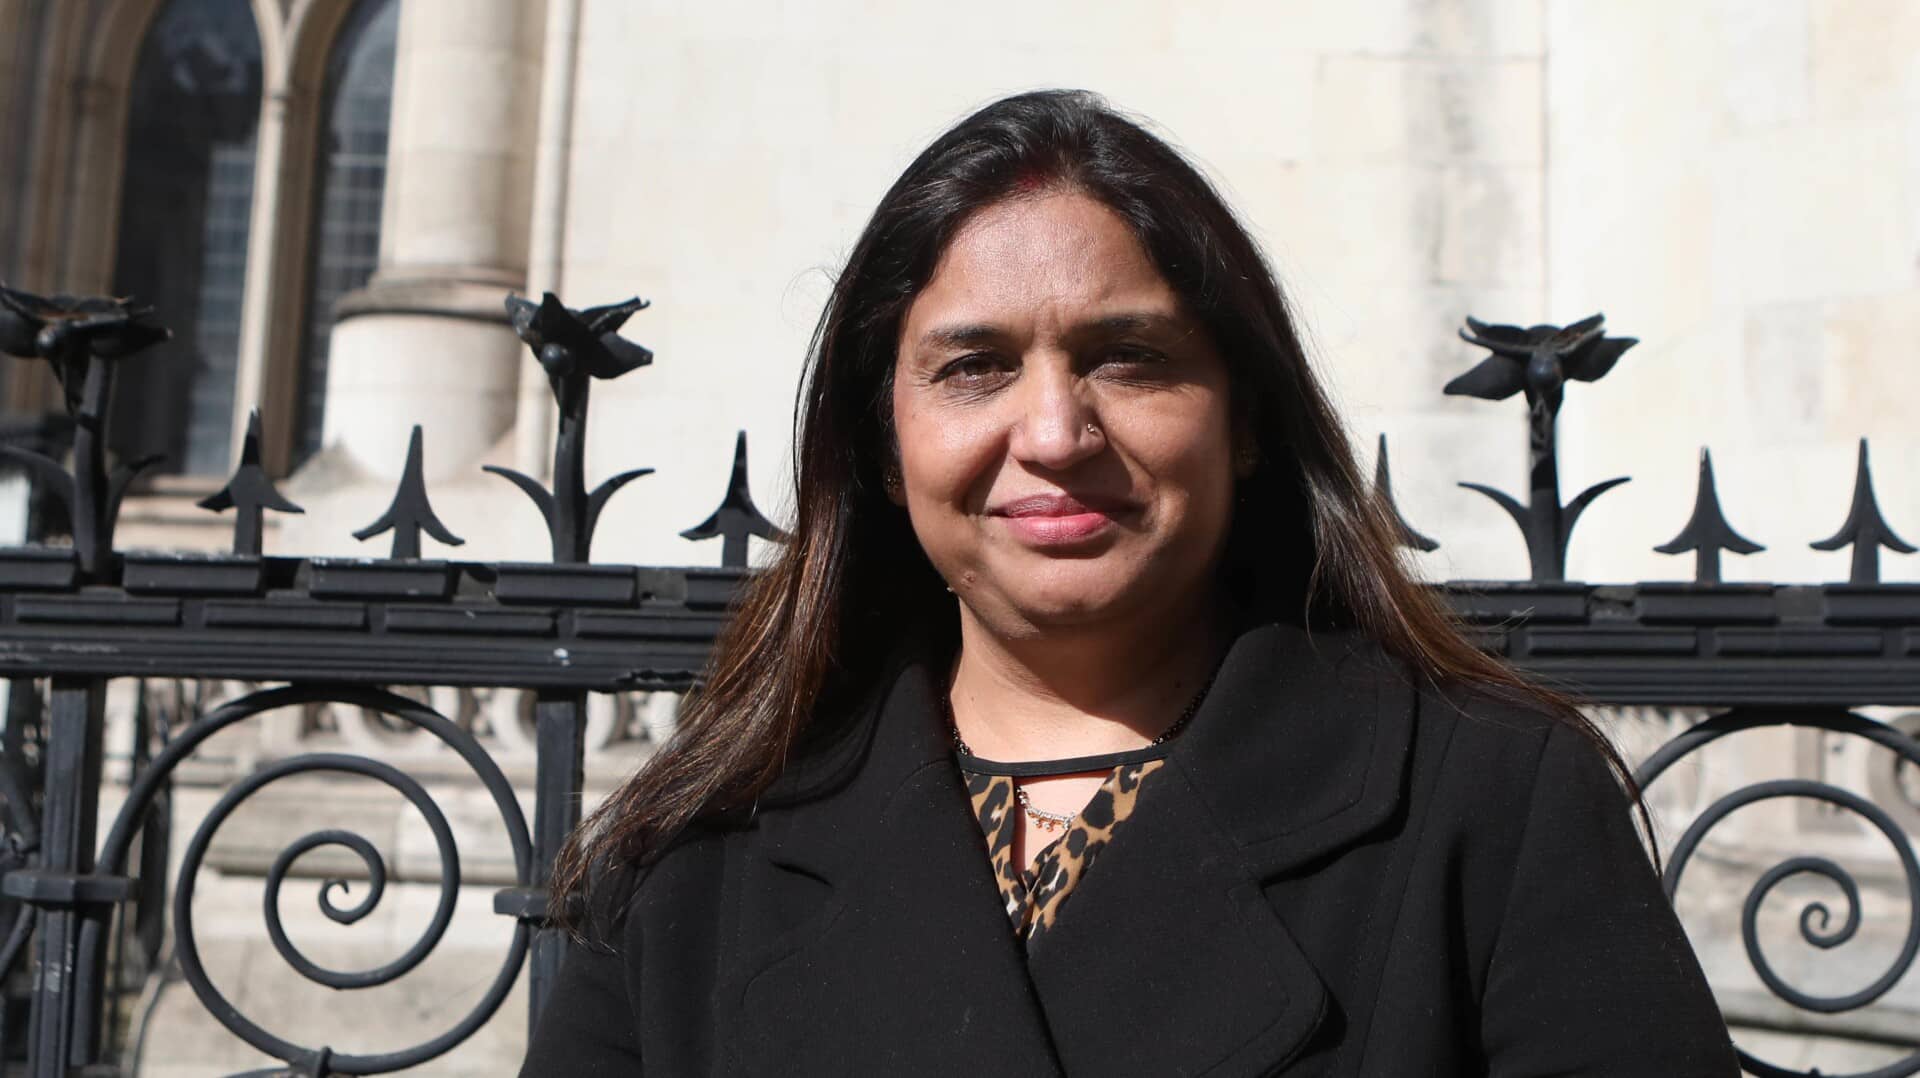 UK: Indian-origin woman wrongly jailed while pregnant rejects apology 